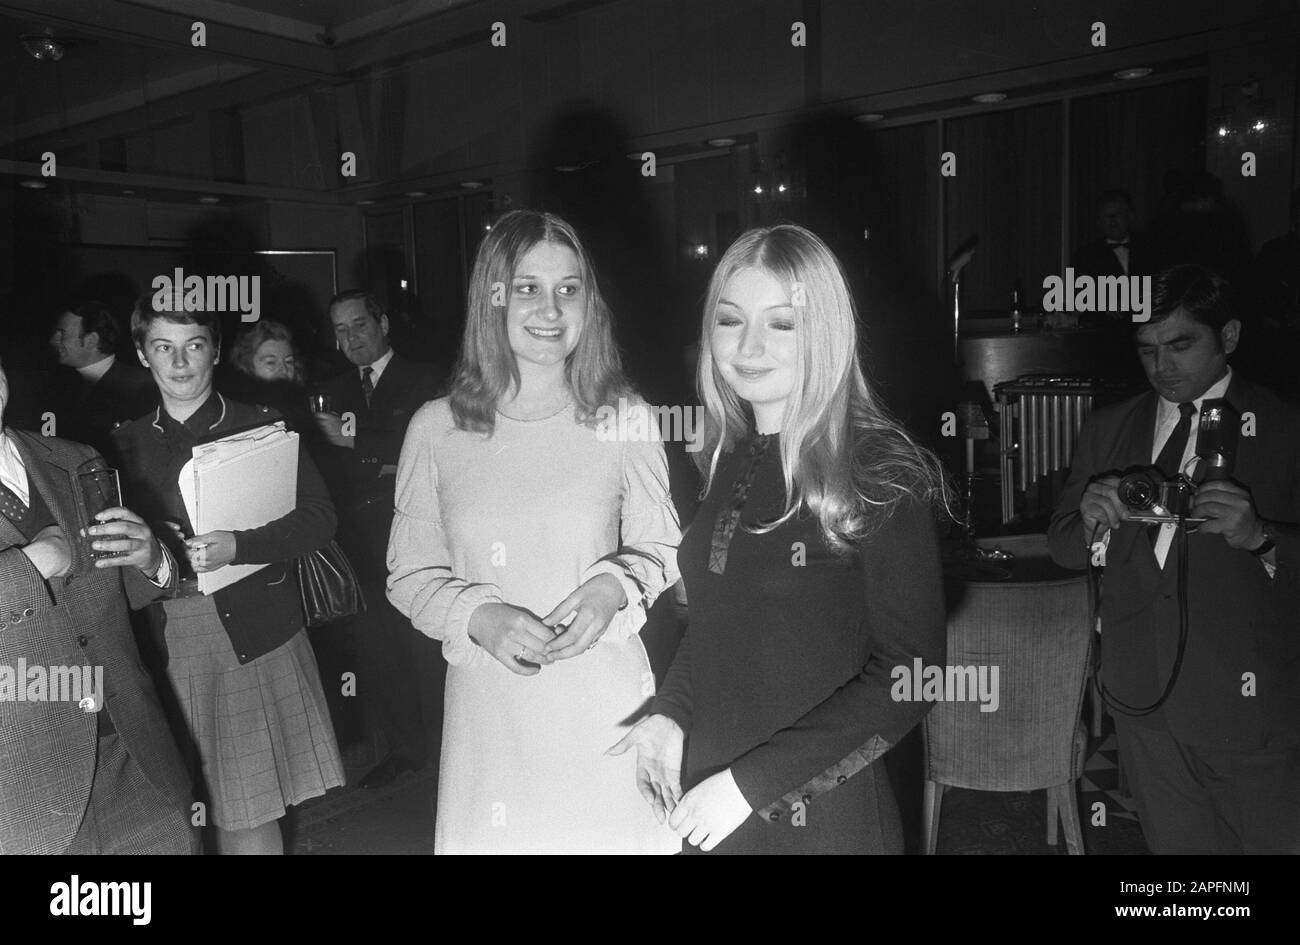 Eurovision Song Contest 1970 in RAI Amsterdam Description: Mayor Samkalden receives participants at Eurovision Song Festival in Hotel Kras in Amsterdam. Eva Sršen and Mary Hopkin Date: 19 March 1970 Location: Amsterdam, Noord-Holland Keywords: artists, song festivals Personal name: Hopkin, Mary Stock Photo